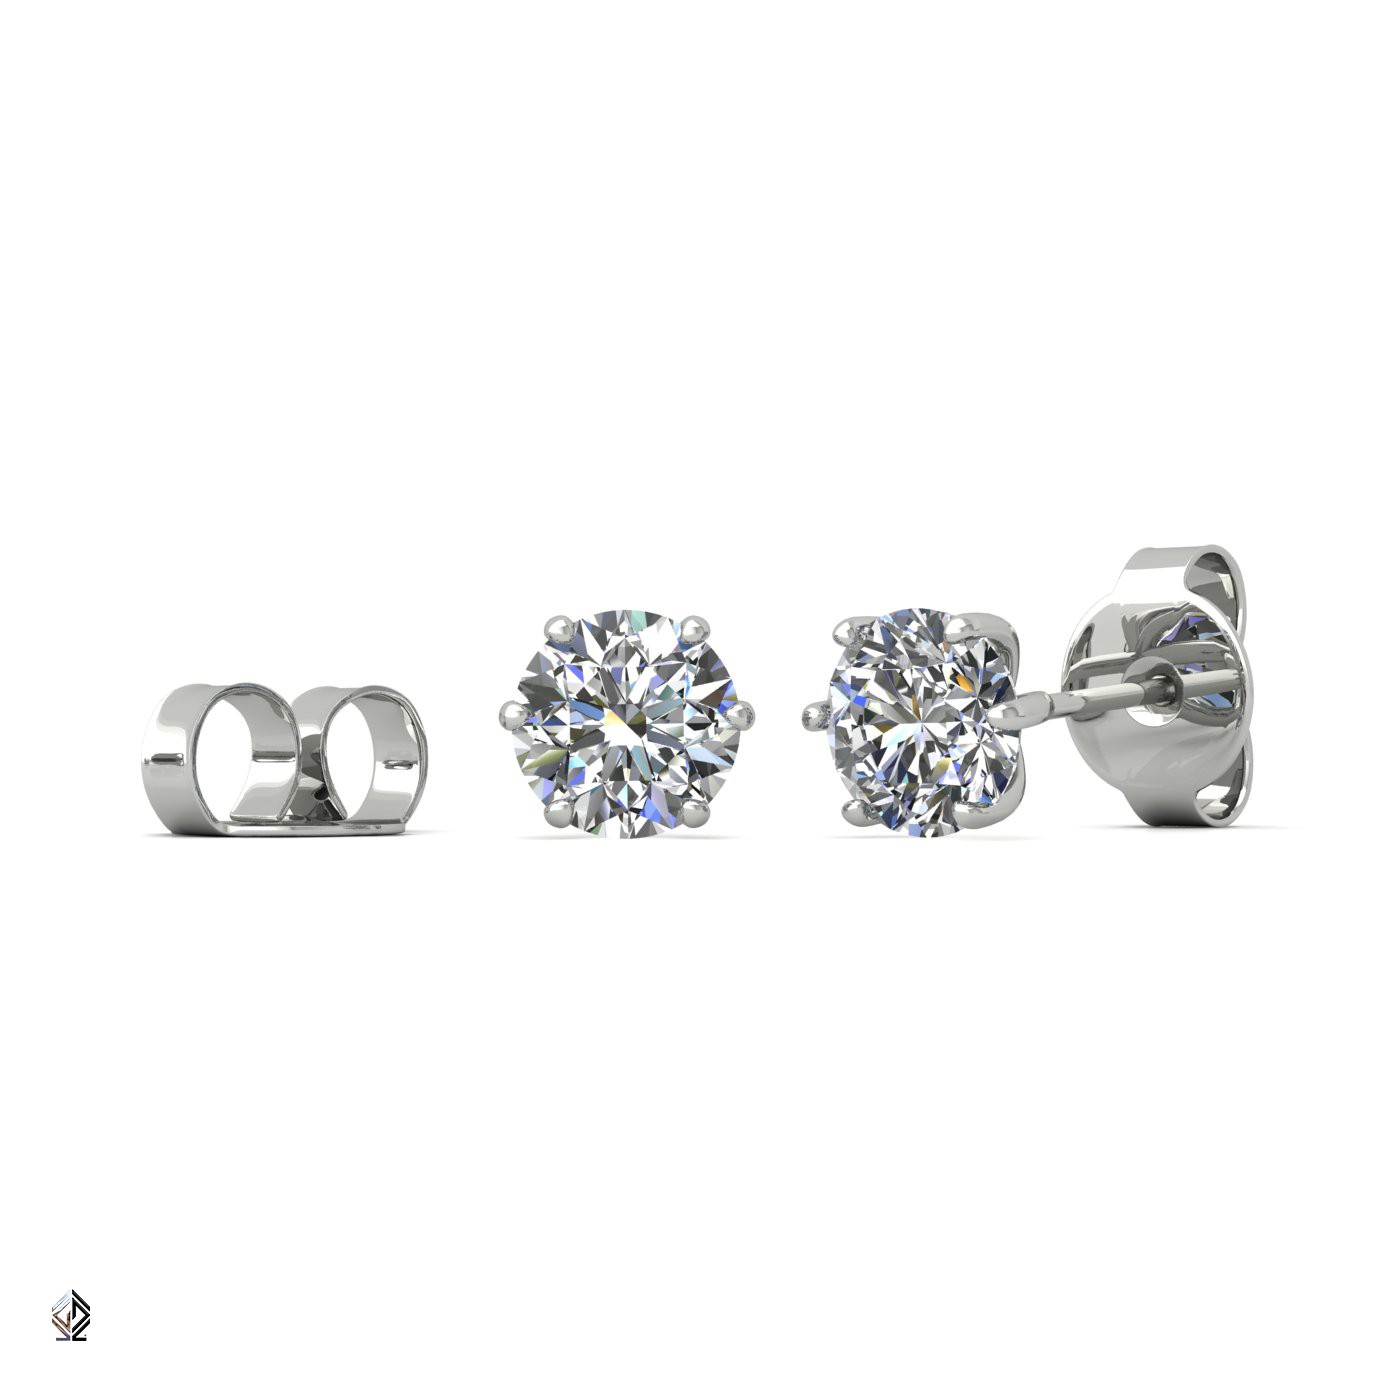 18k white gold 2.5 ct each (5,0 tcw) 6 prongs round shape diamond earrings Photos & images